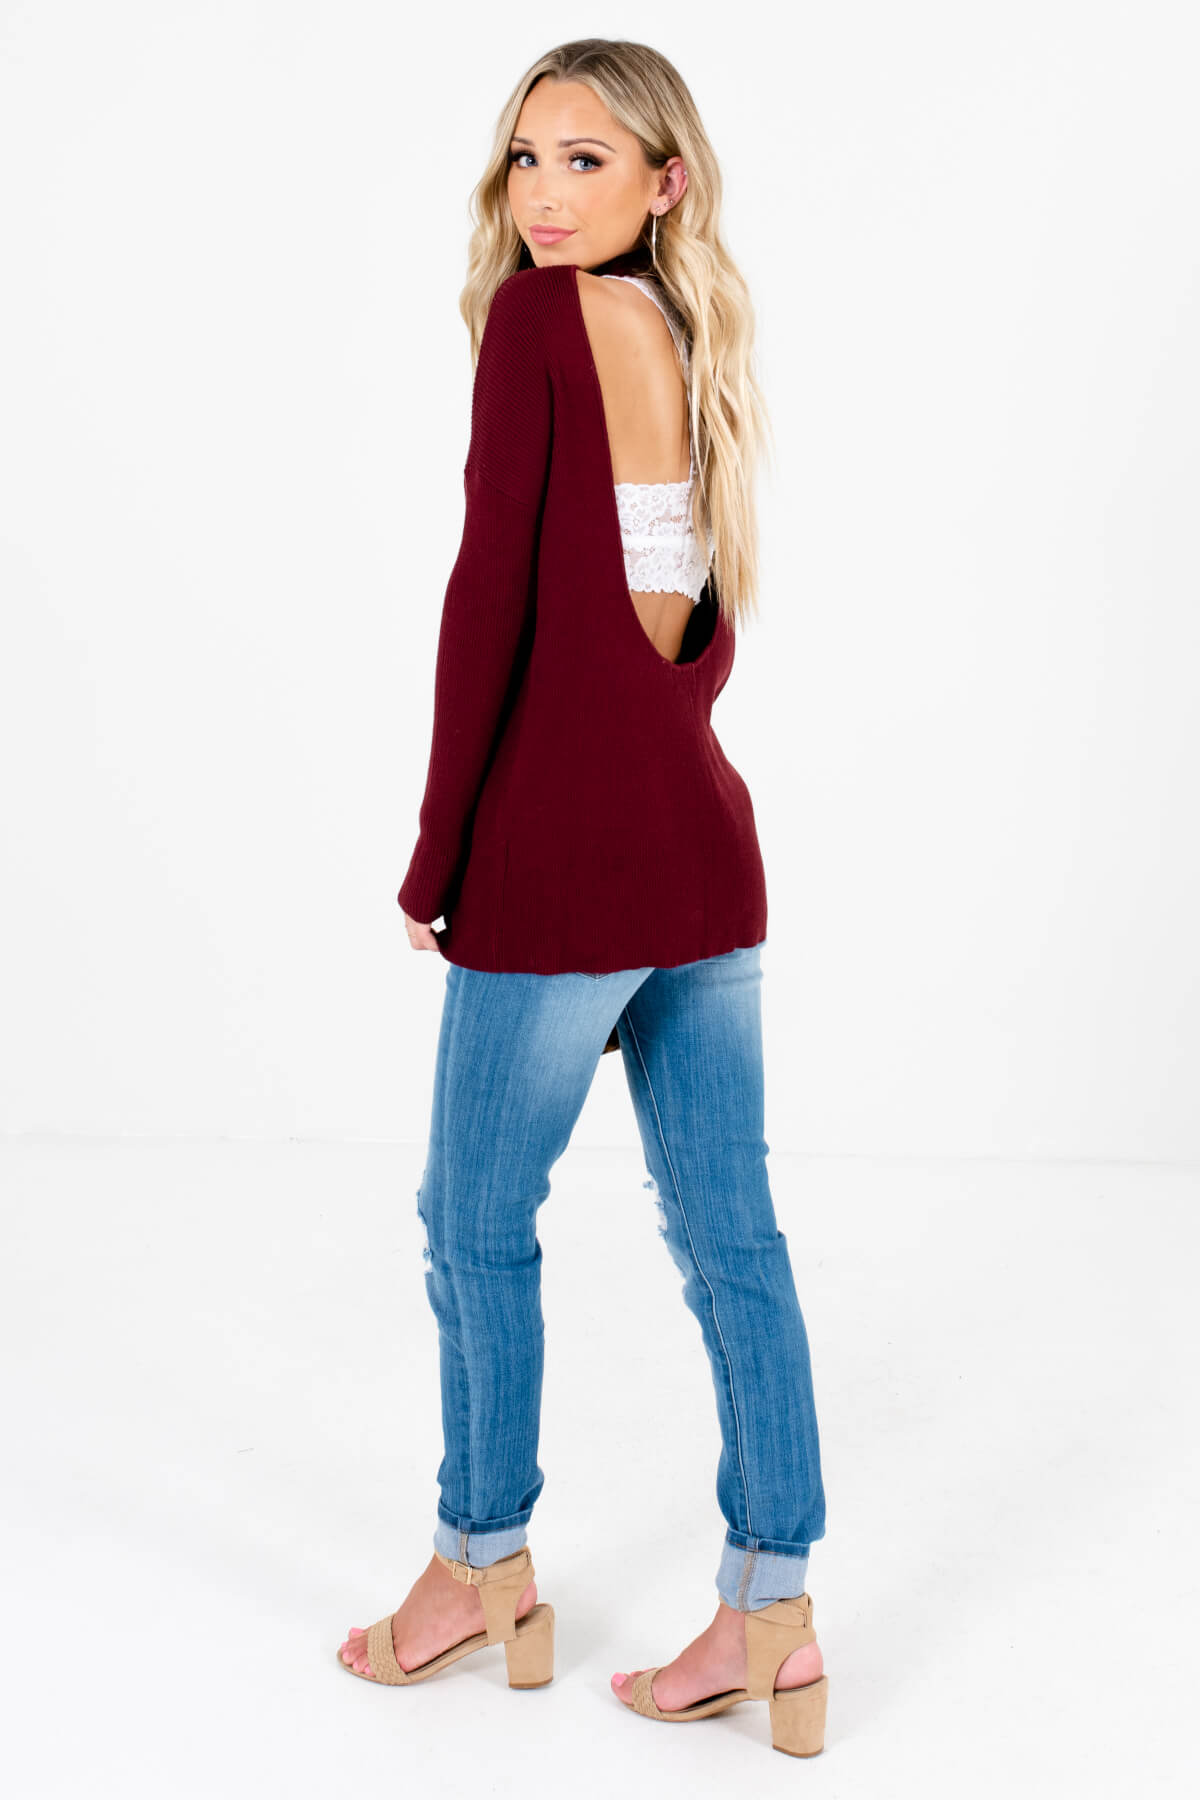 Burgundy Cute and Comfortable Boutique Sweaters for Women